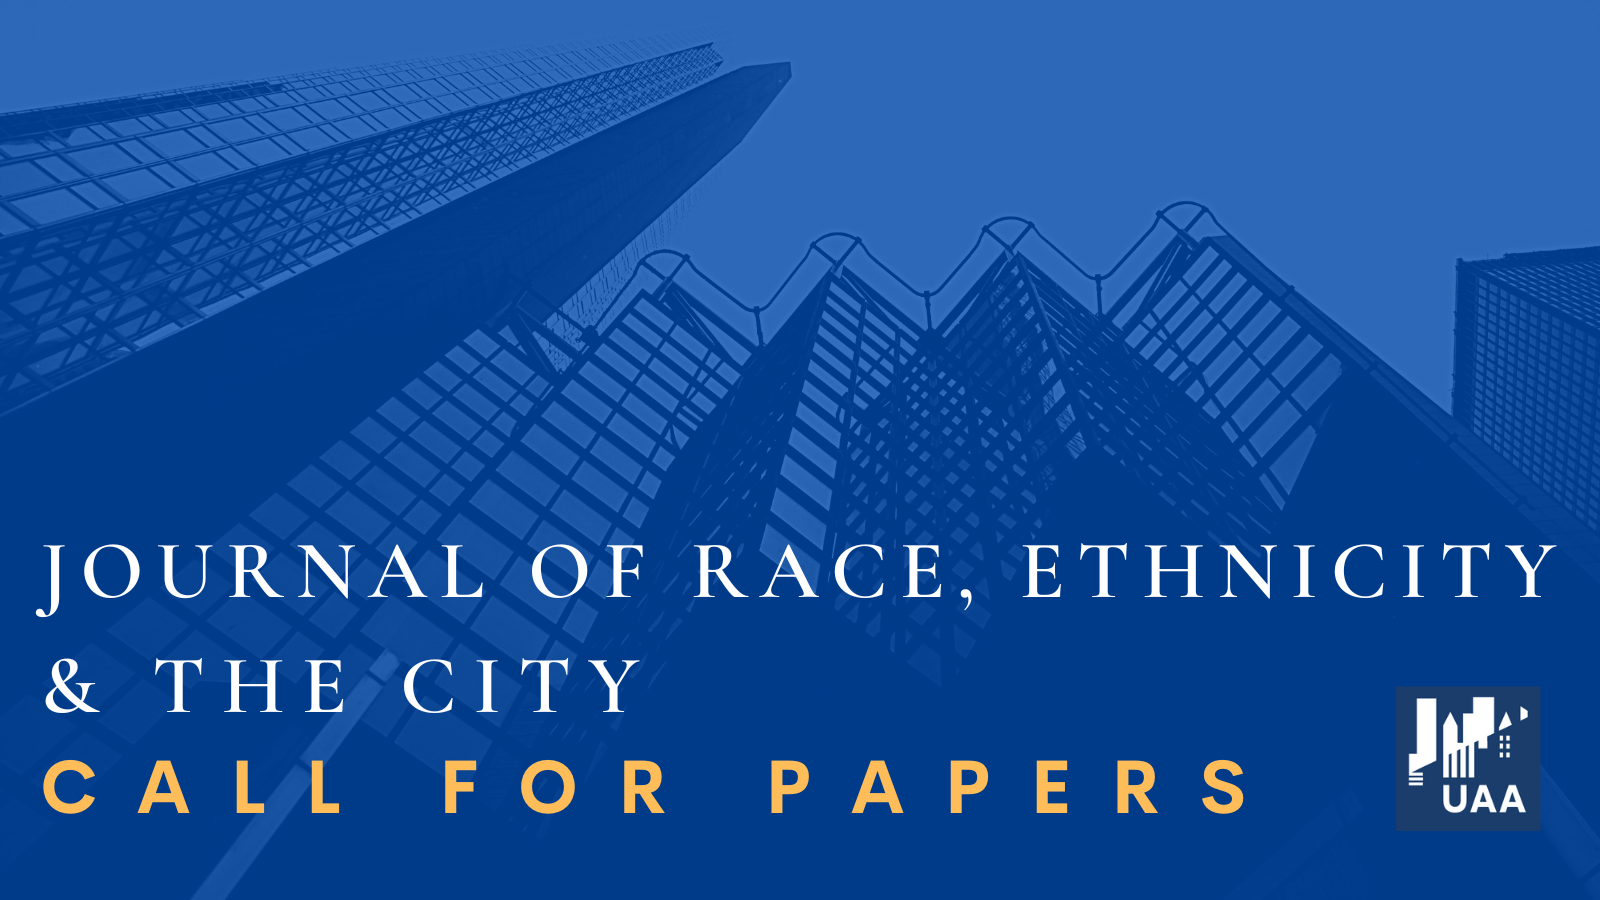 Call for papers: Journal of Race, Ethnicity & the City